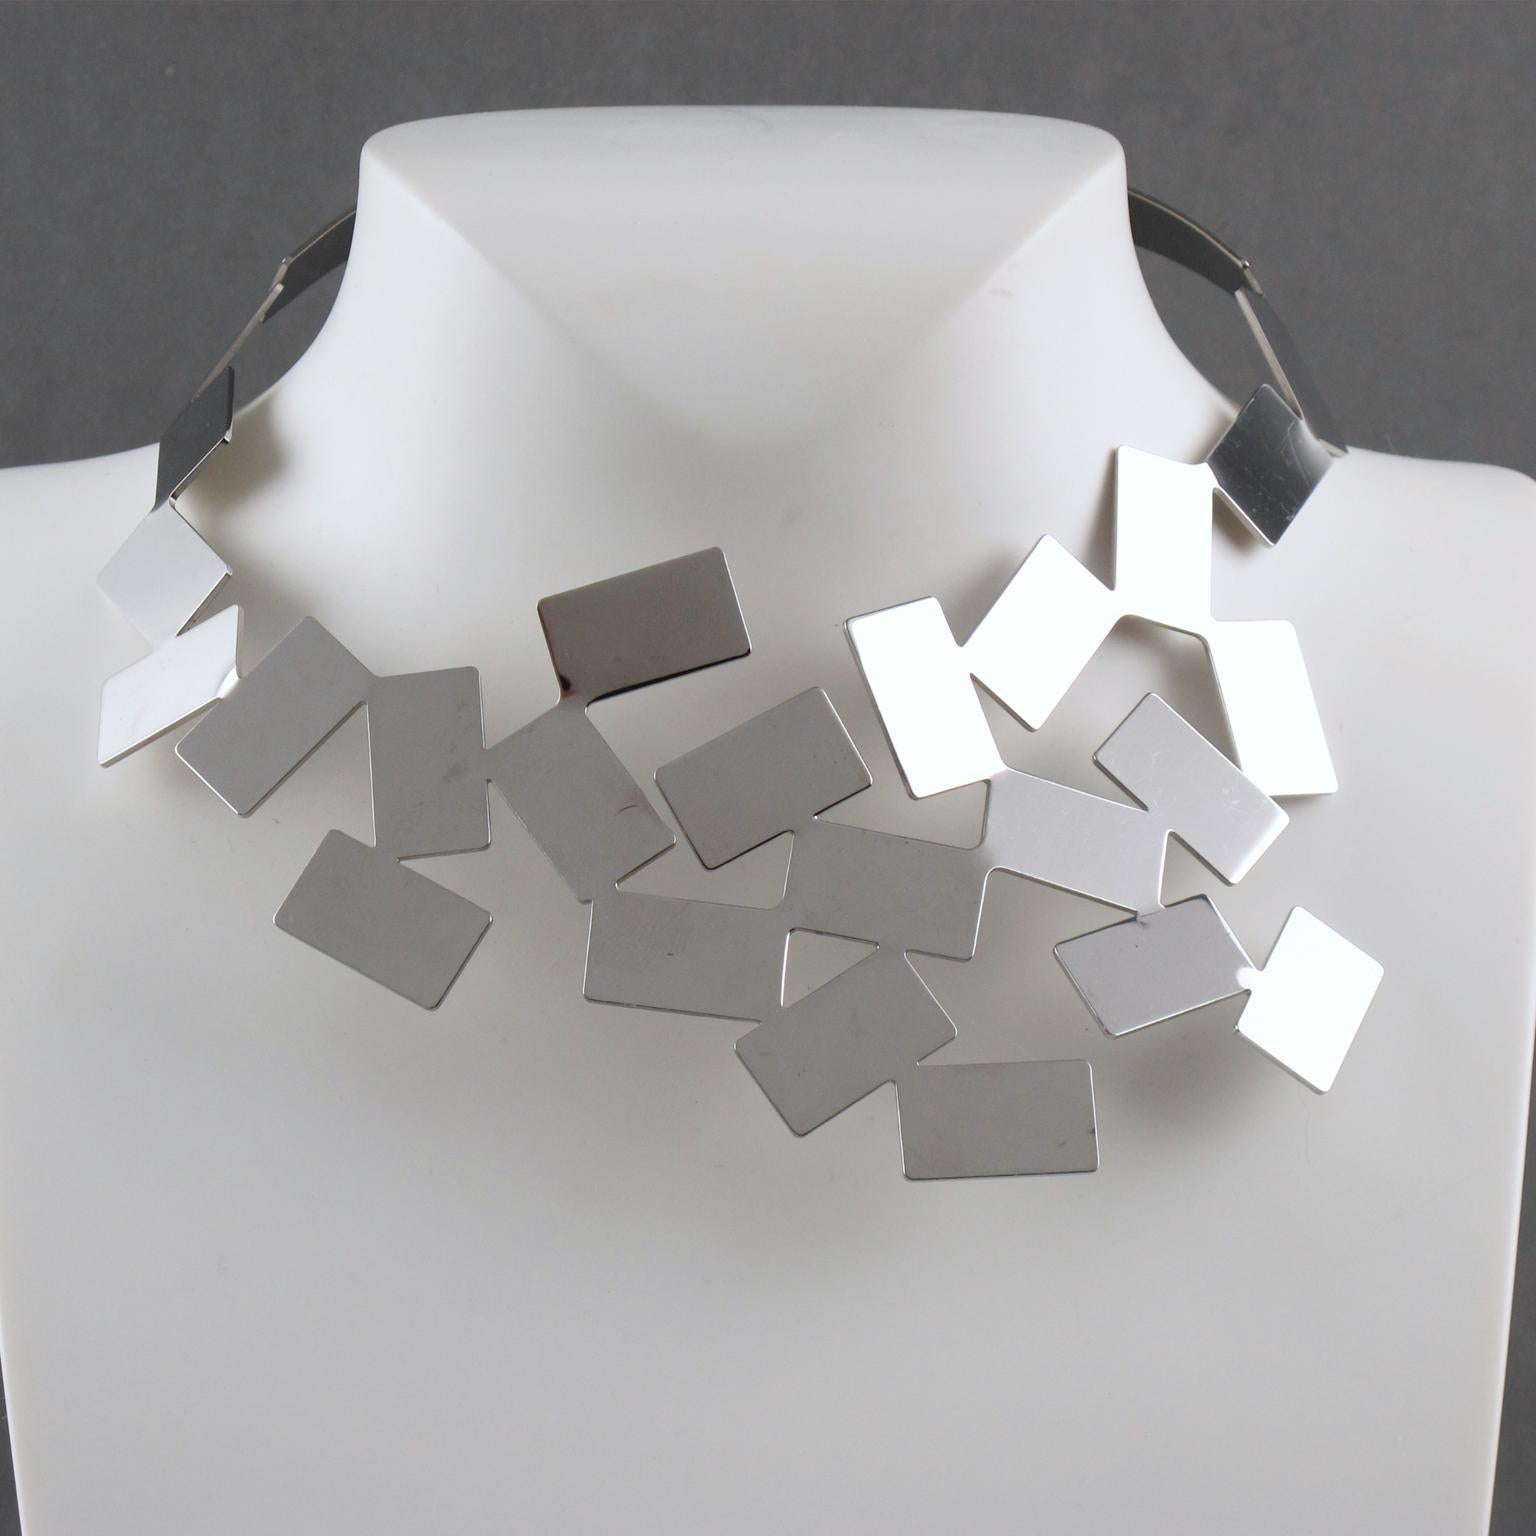 This stunning, modern collar necklace designed by Mario Trimarchi for Alessi is a real statement piece for any formal occasion. In vibrant stainless steel with a polished mirrored surface, the cubic design looks sleek and stylish. Marked at the